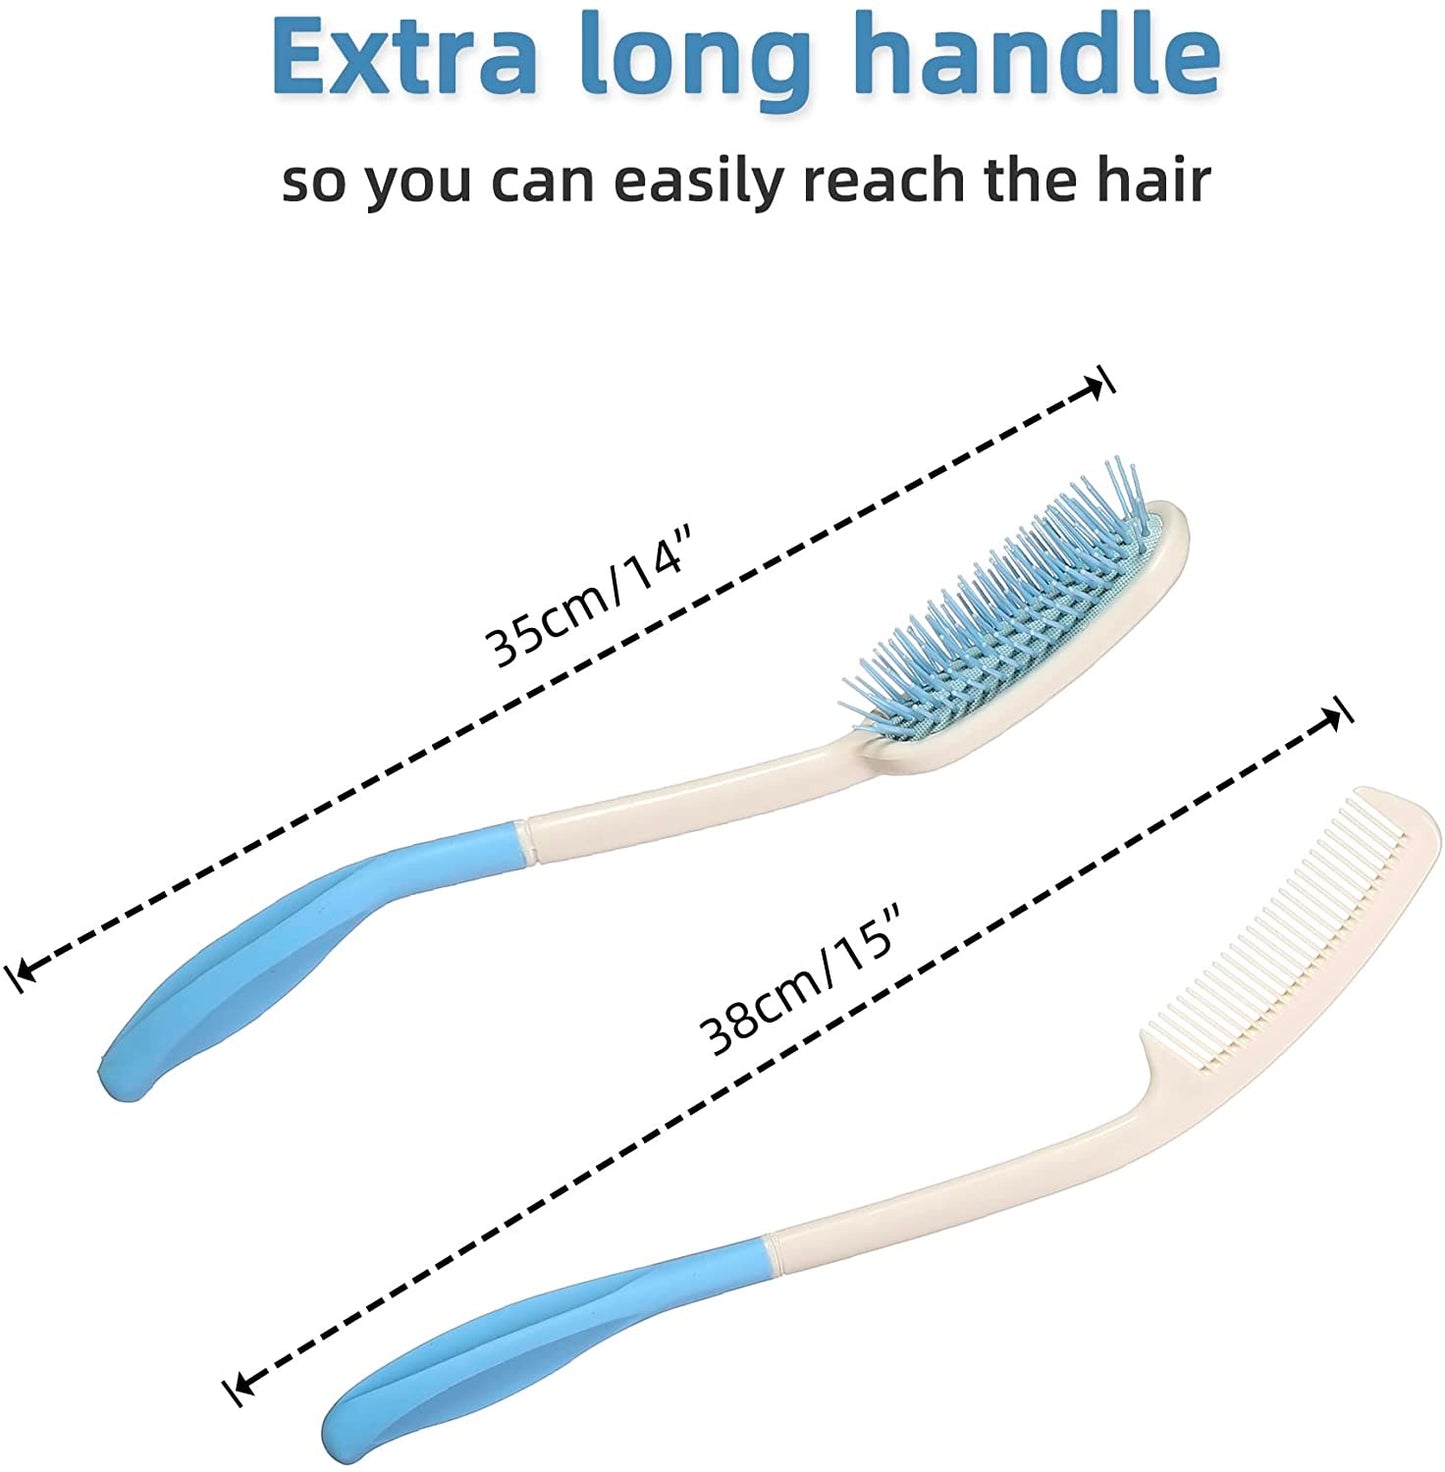 dimensions of long handle brush and comb